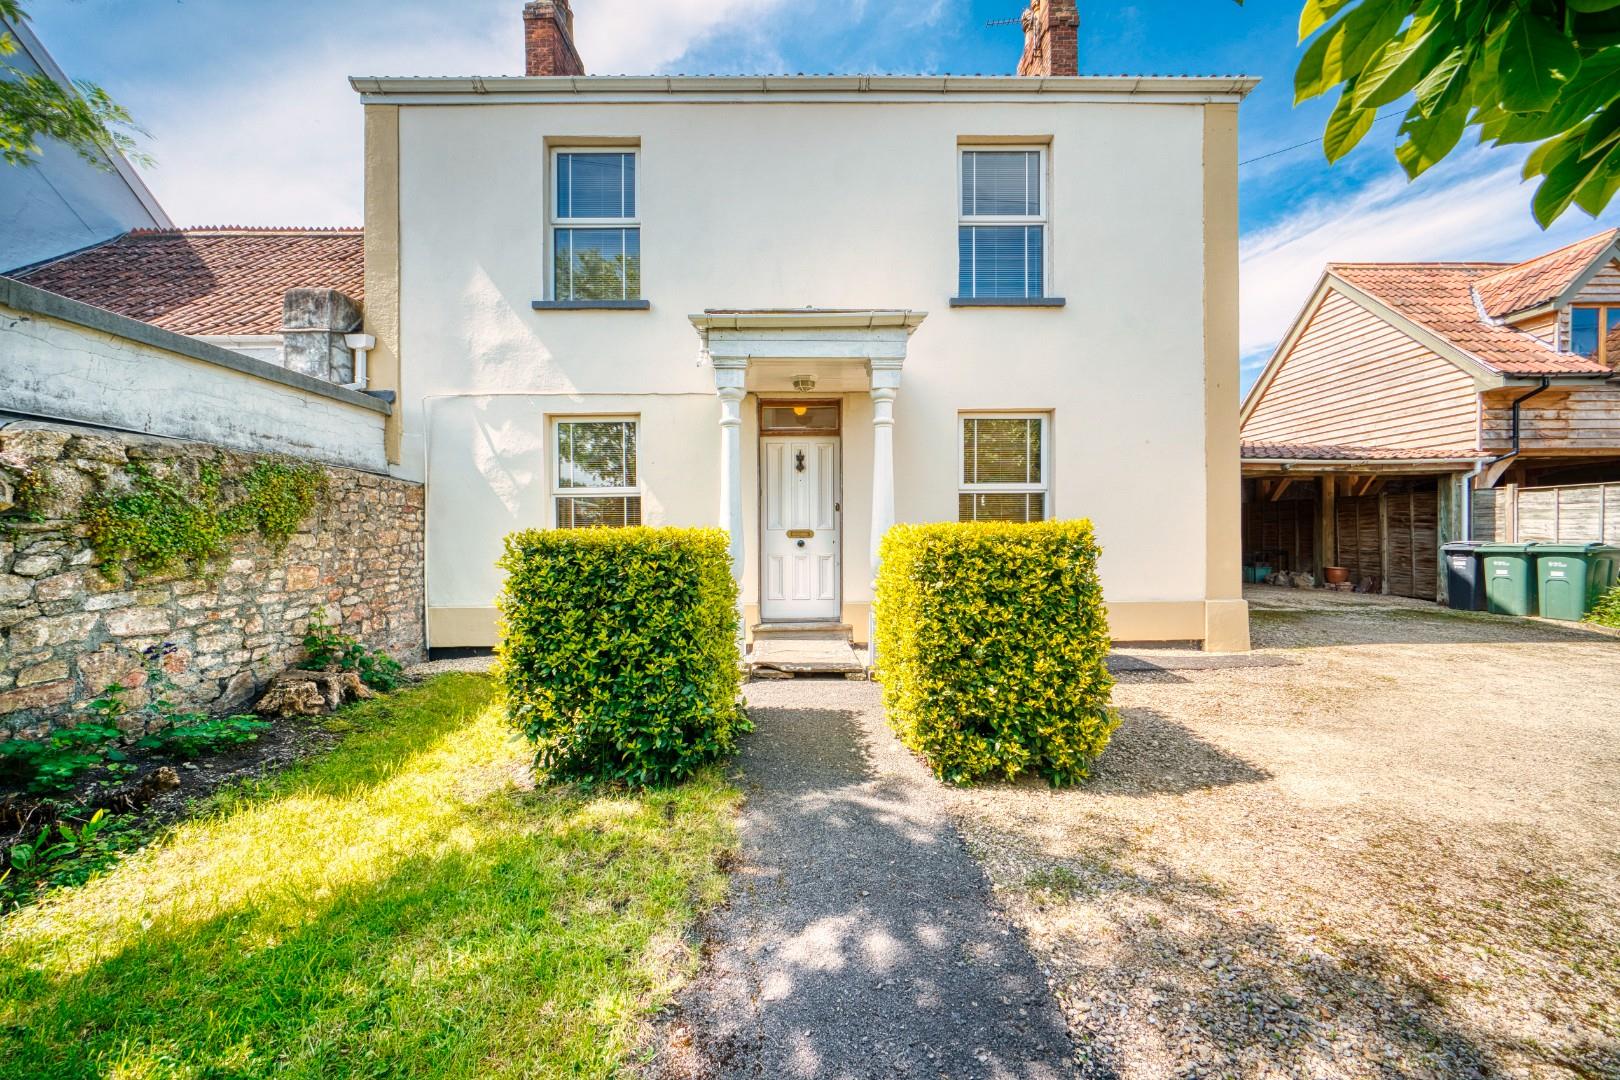 Charismatic period home in the village of Yatton